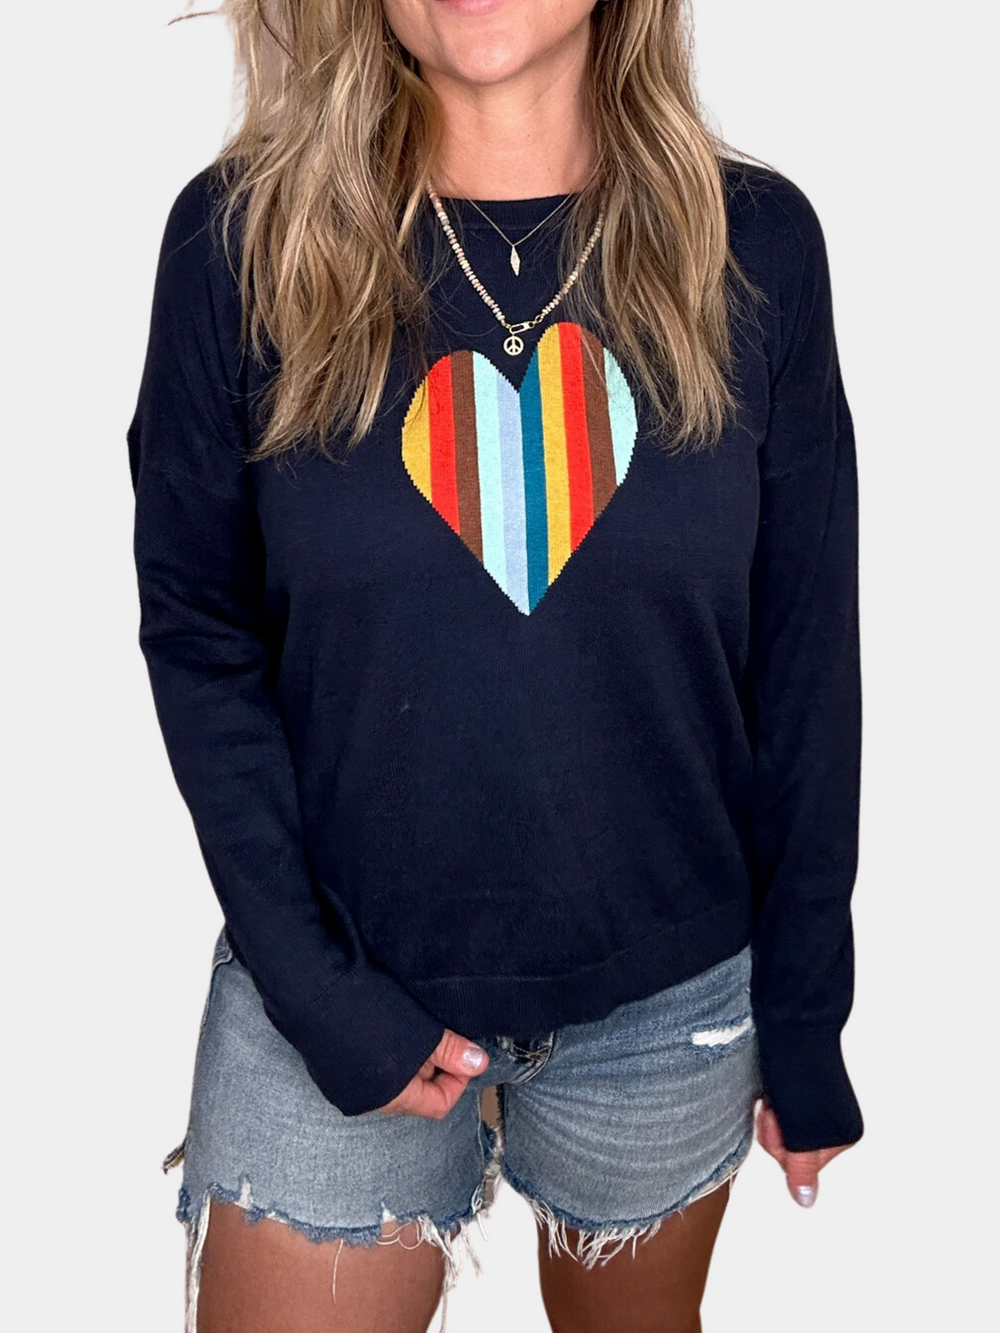 HEART STRIPED SWEATER - NAVY - Kingfisher Road - Online Boutique